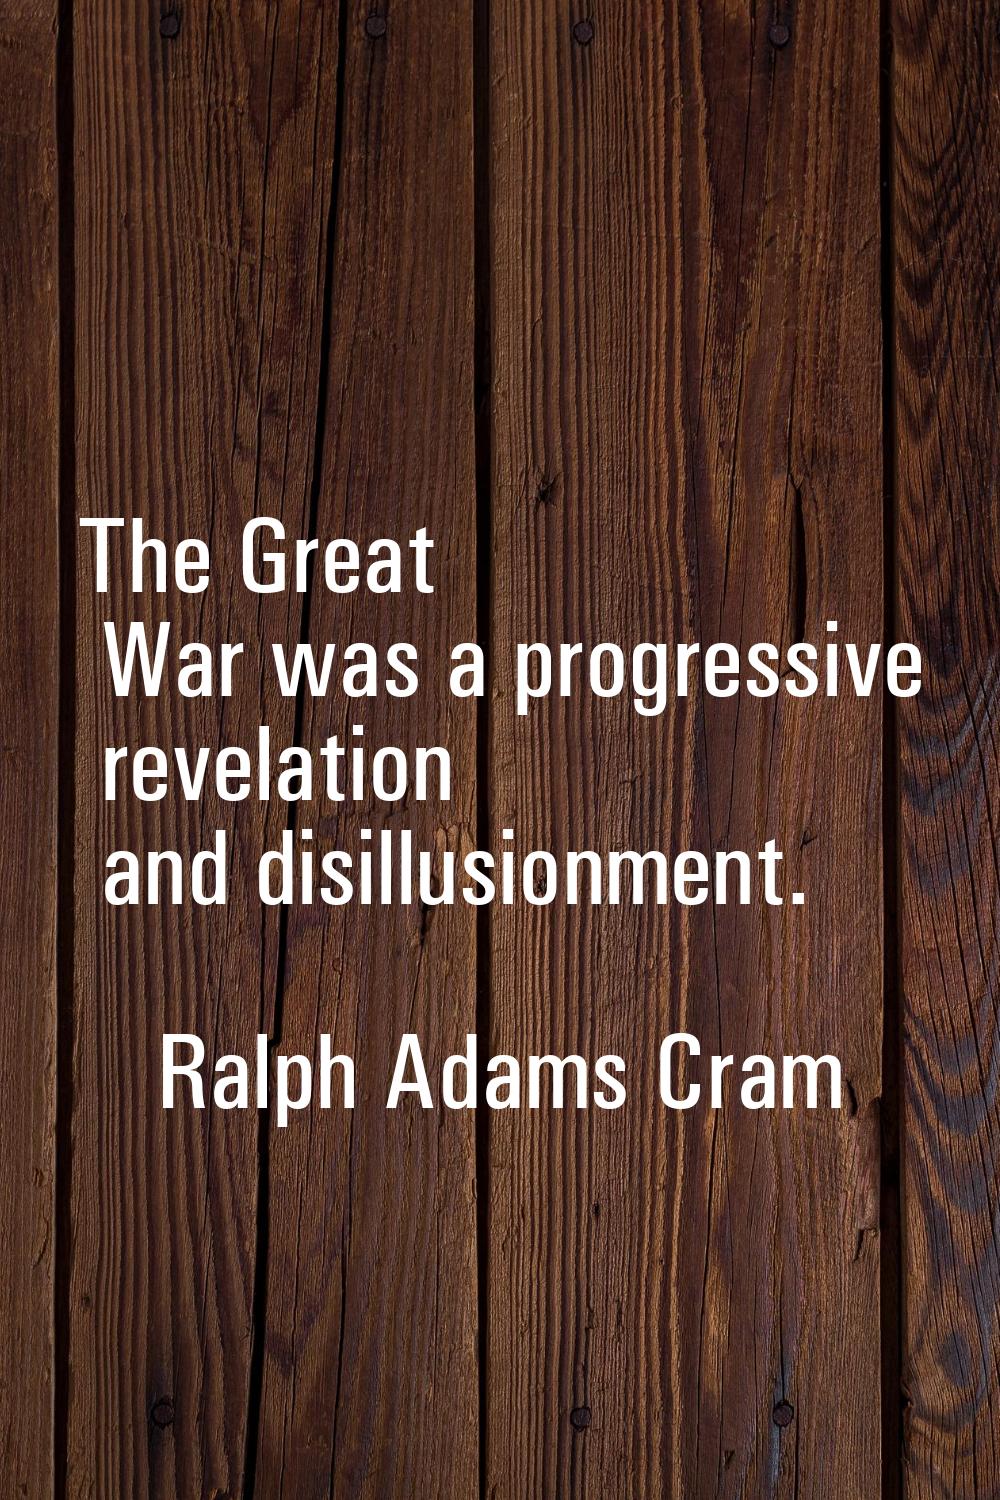 The Great War was a progressive revelation and disillusionment.